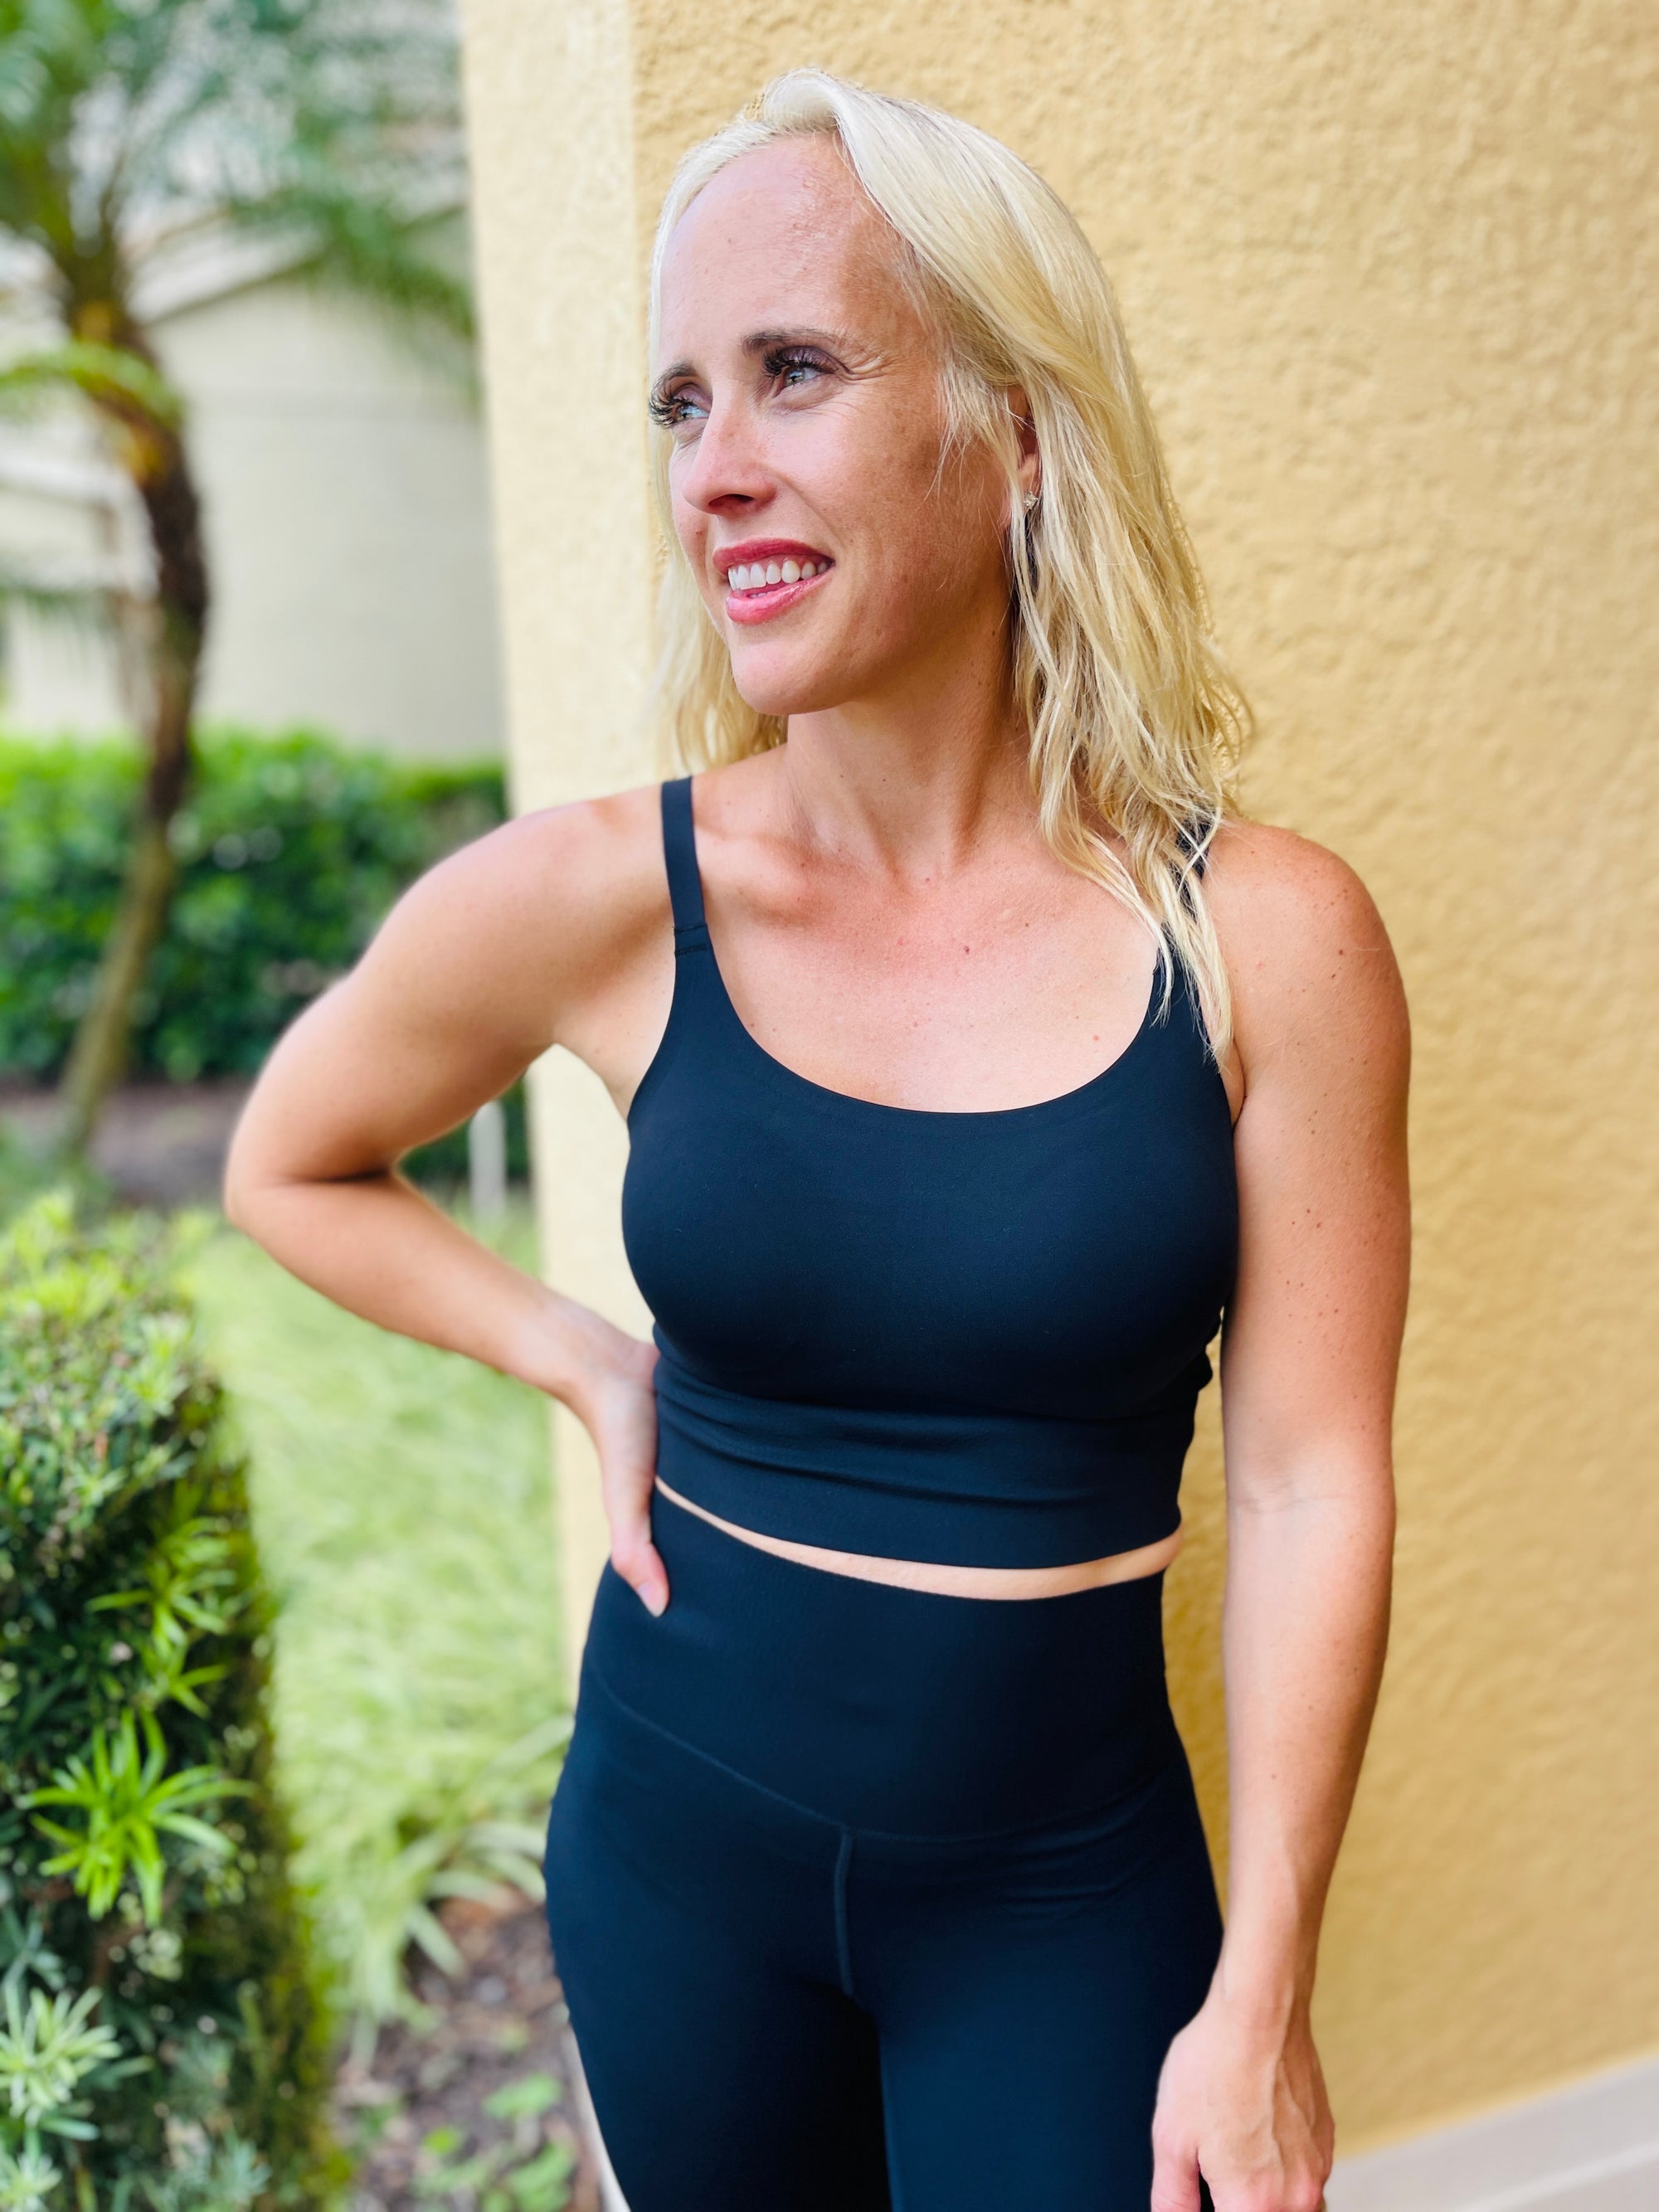 Fawnfit 3 in 1 Athleisure Mini Tank Dress with Built-in Bra